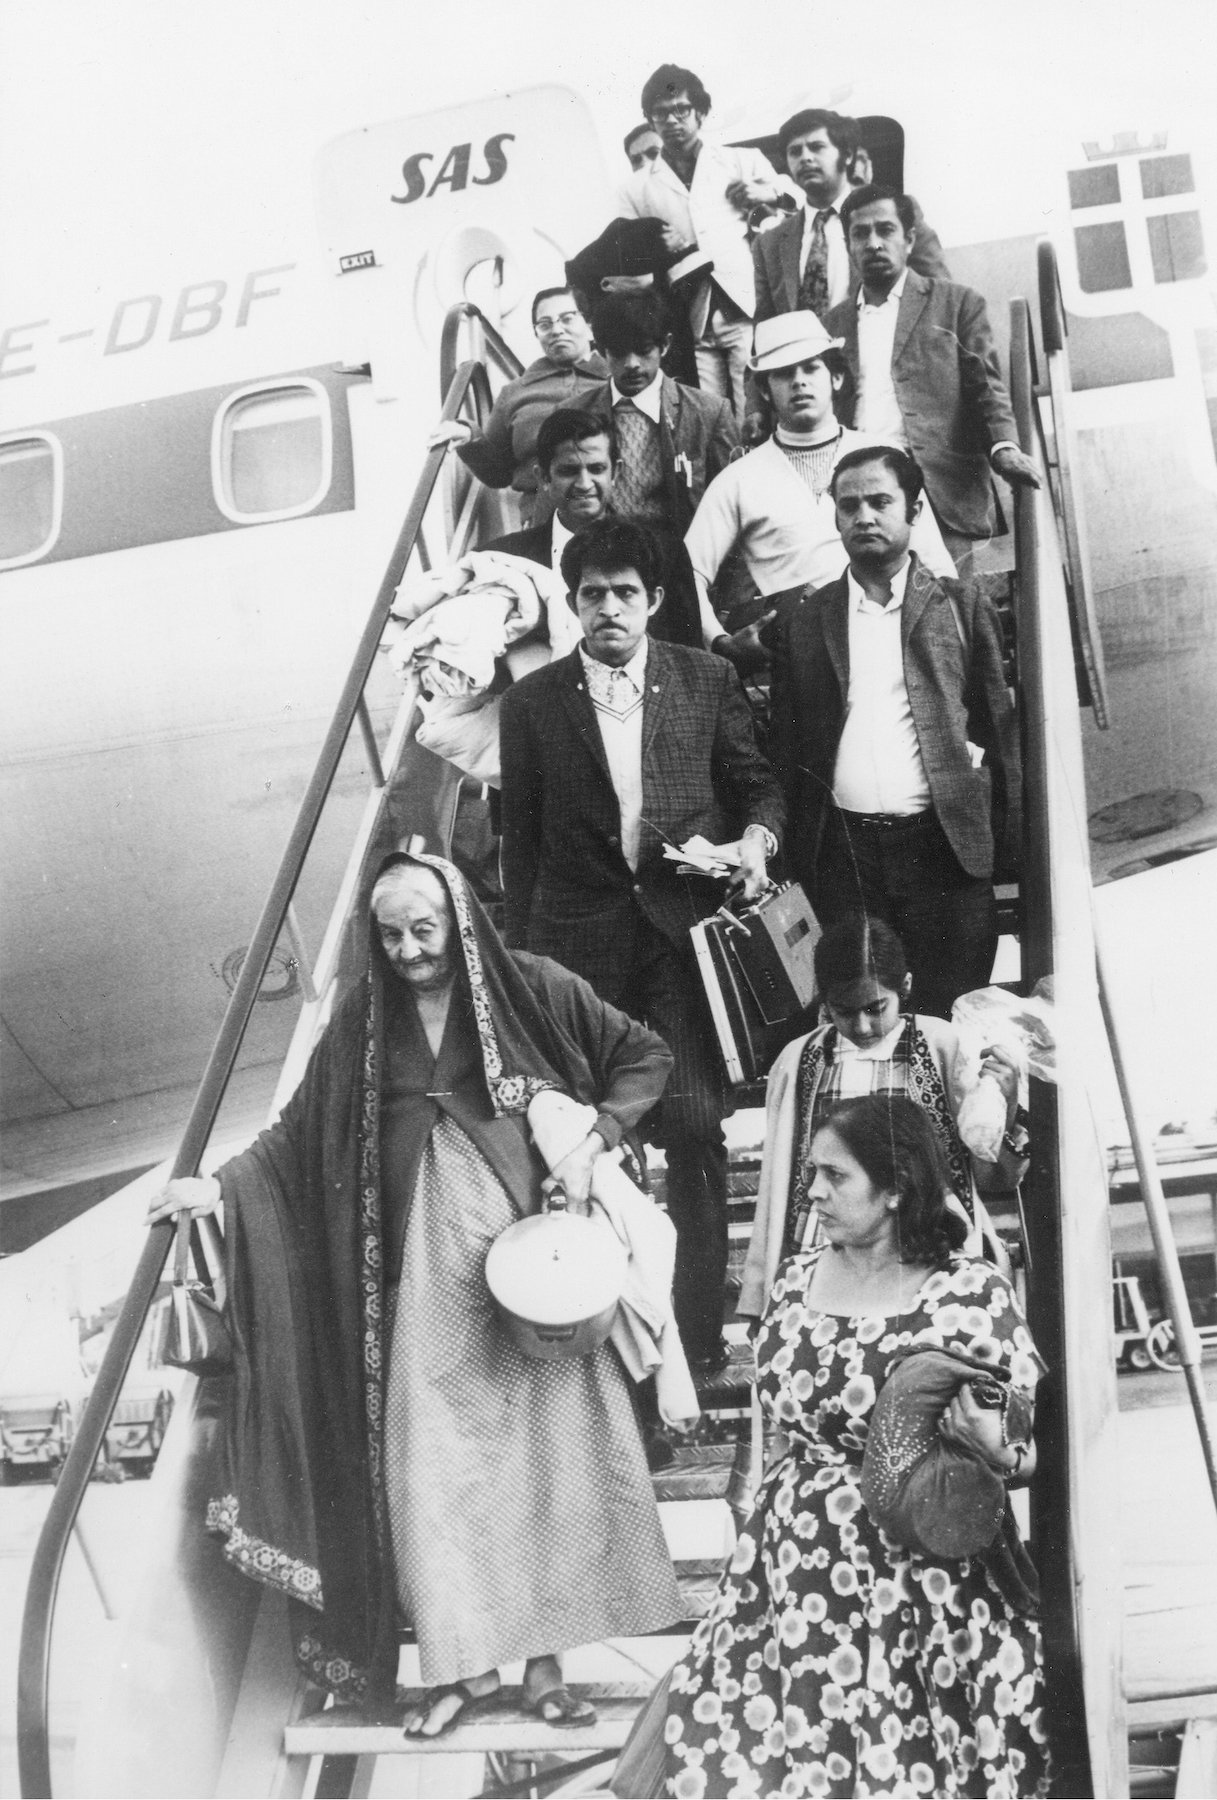 Arrival at Vienna airport of Uganda Asians, 1972. Original Black and white picture